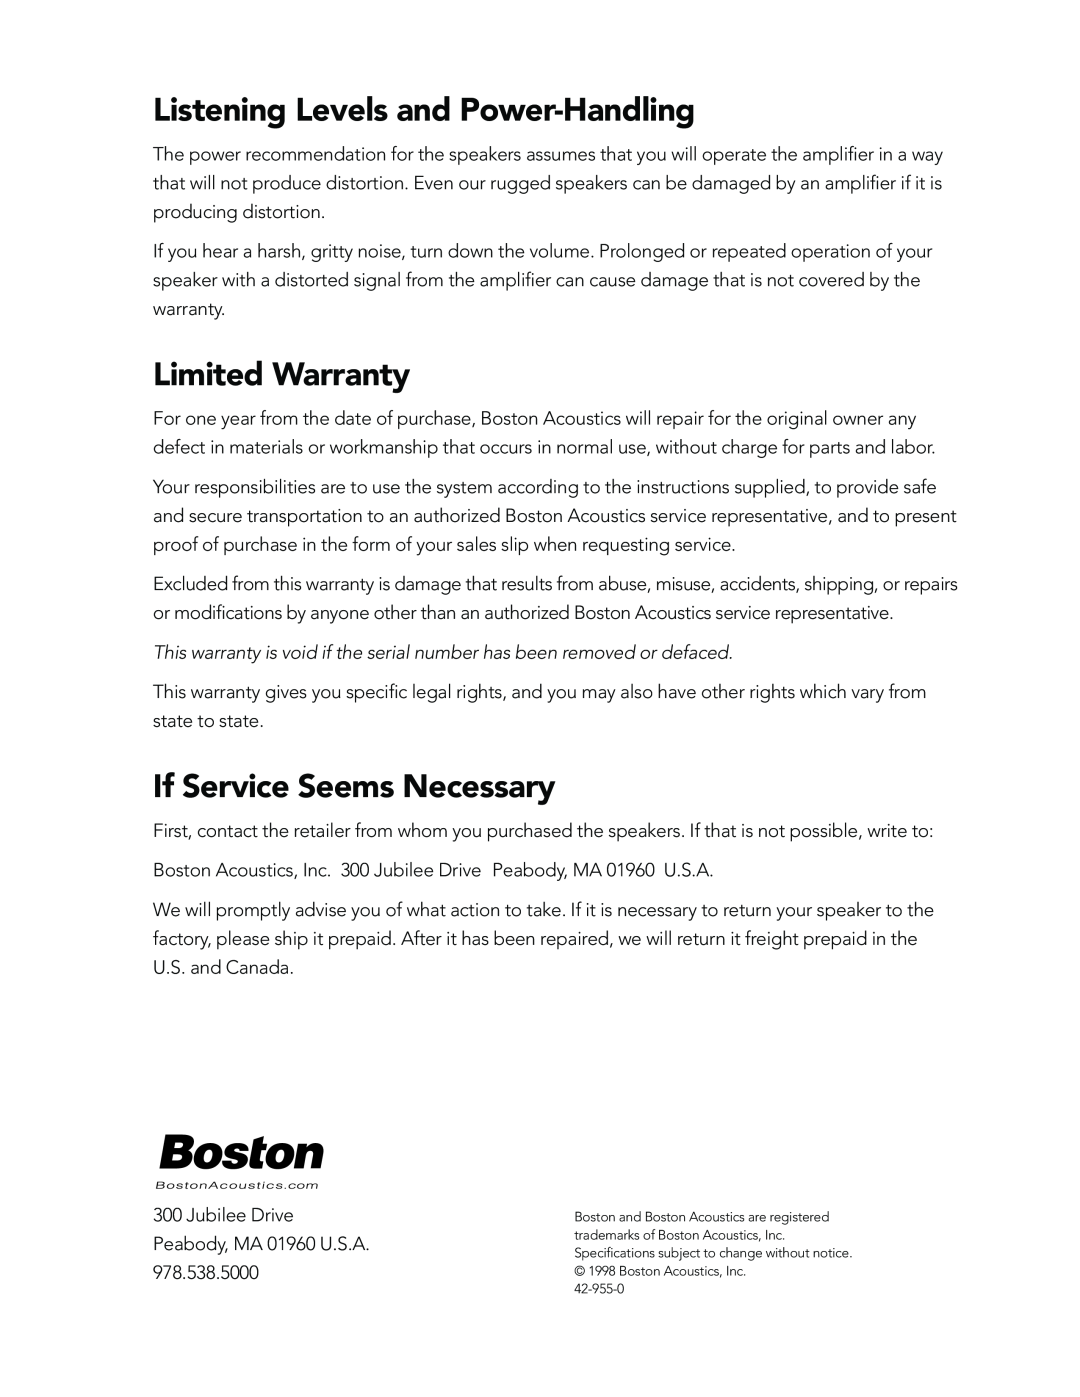 Boston Acoustics 251, 261 manual Listening Levels and Power-Handling, Limited Warranty, If Service Seems Necessary 